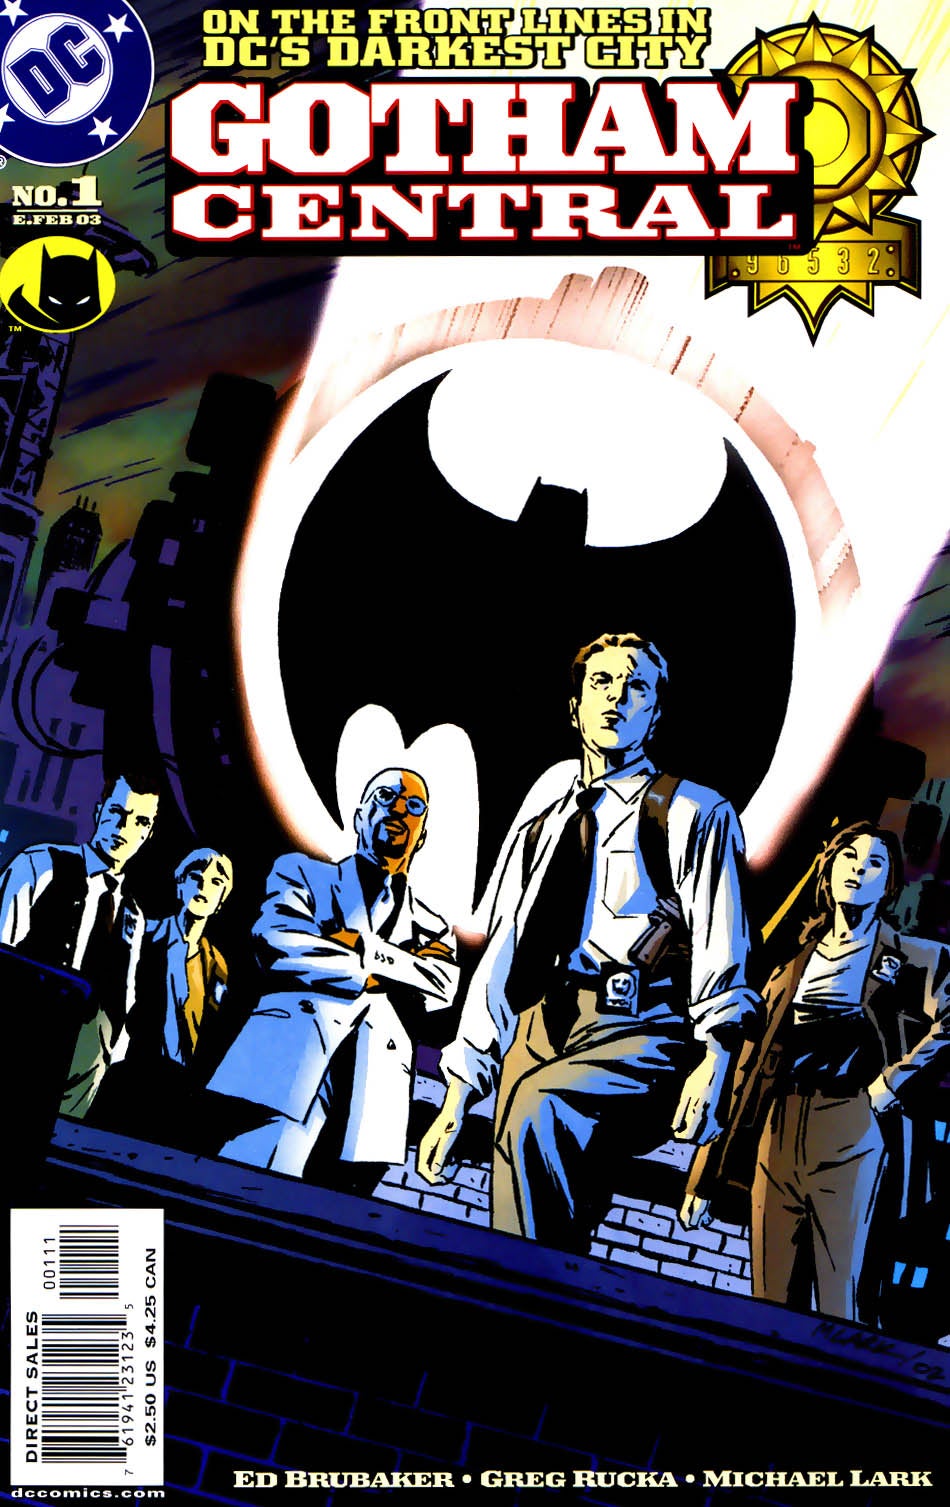 Cover of Gotham Central featuring the mail cast on the rooftop looking at the Bat signal